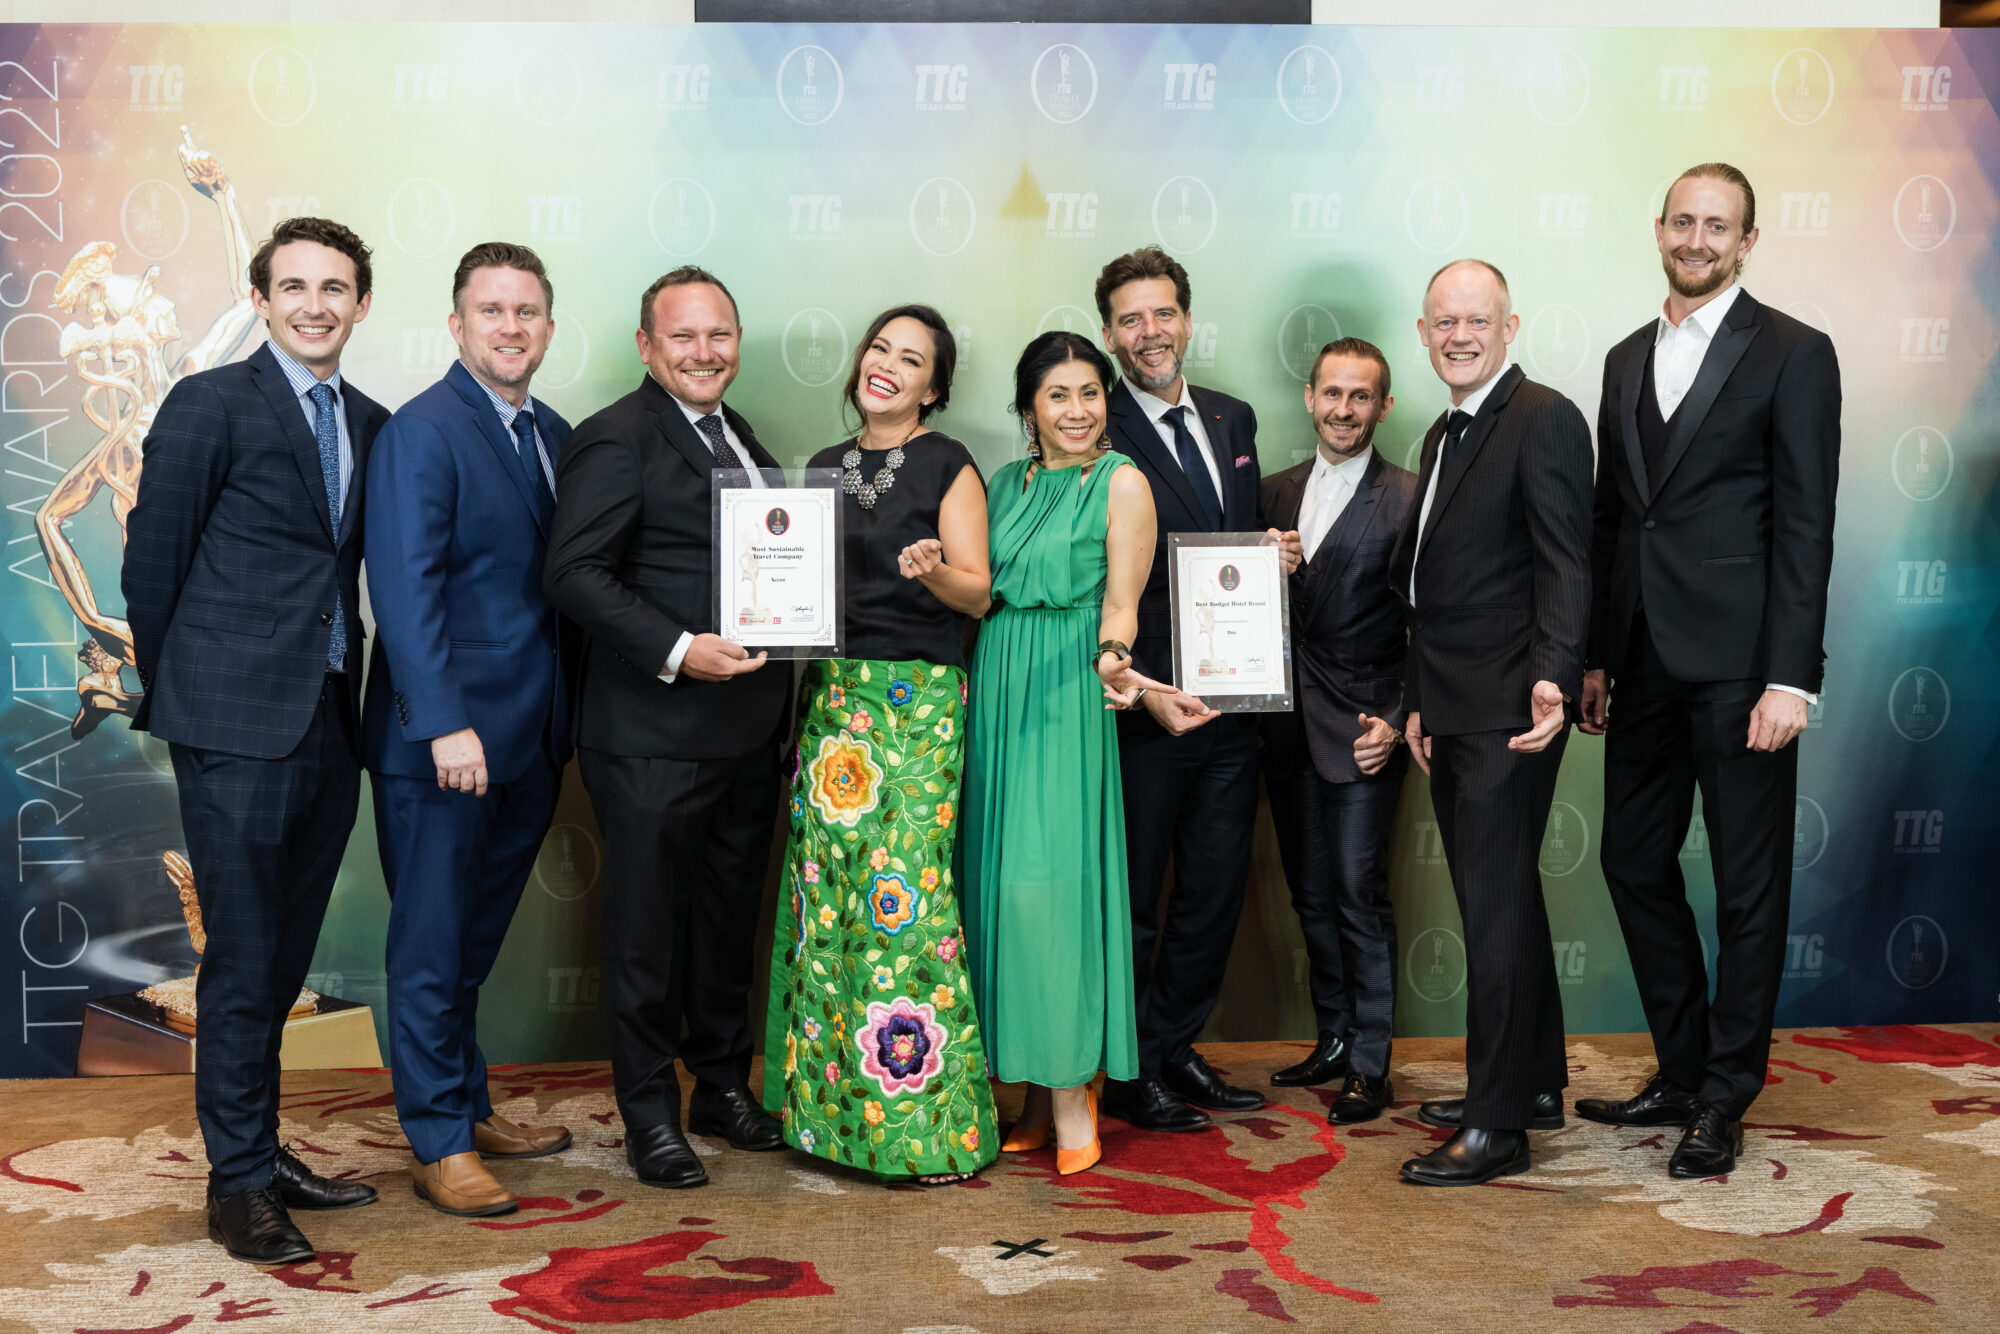 Accor-recognised-as-the-Most-Sustainable-Travel-Company-at-the-TTG-Travel-Awards-1.jpg